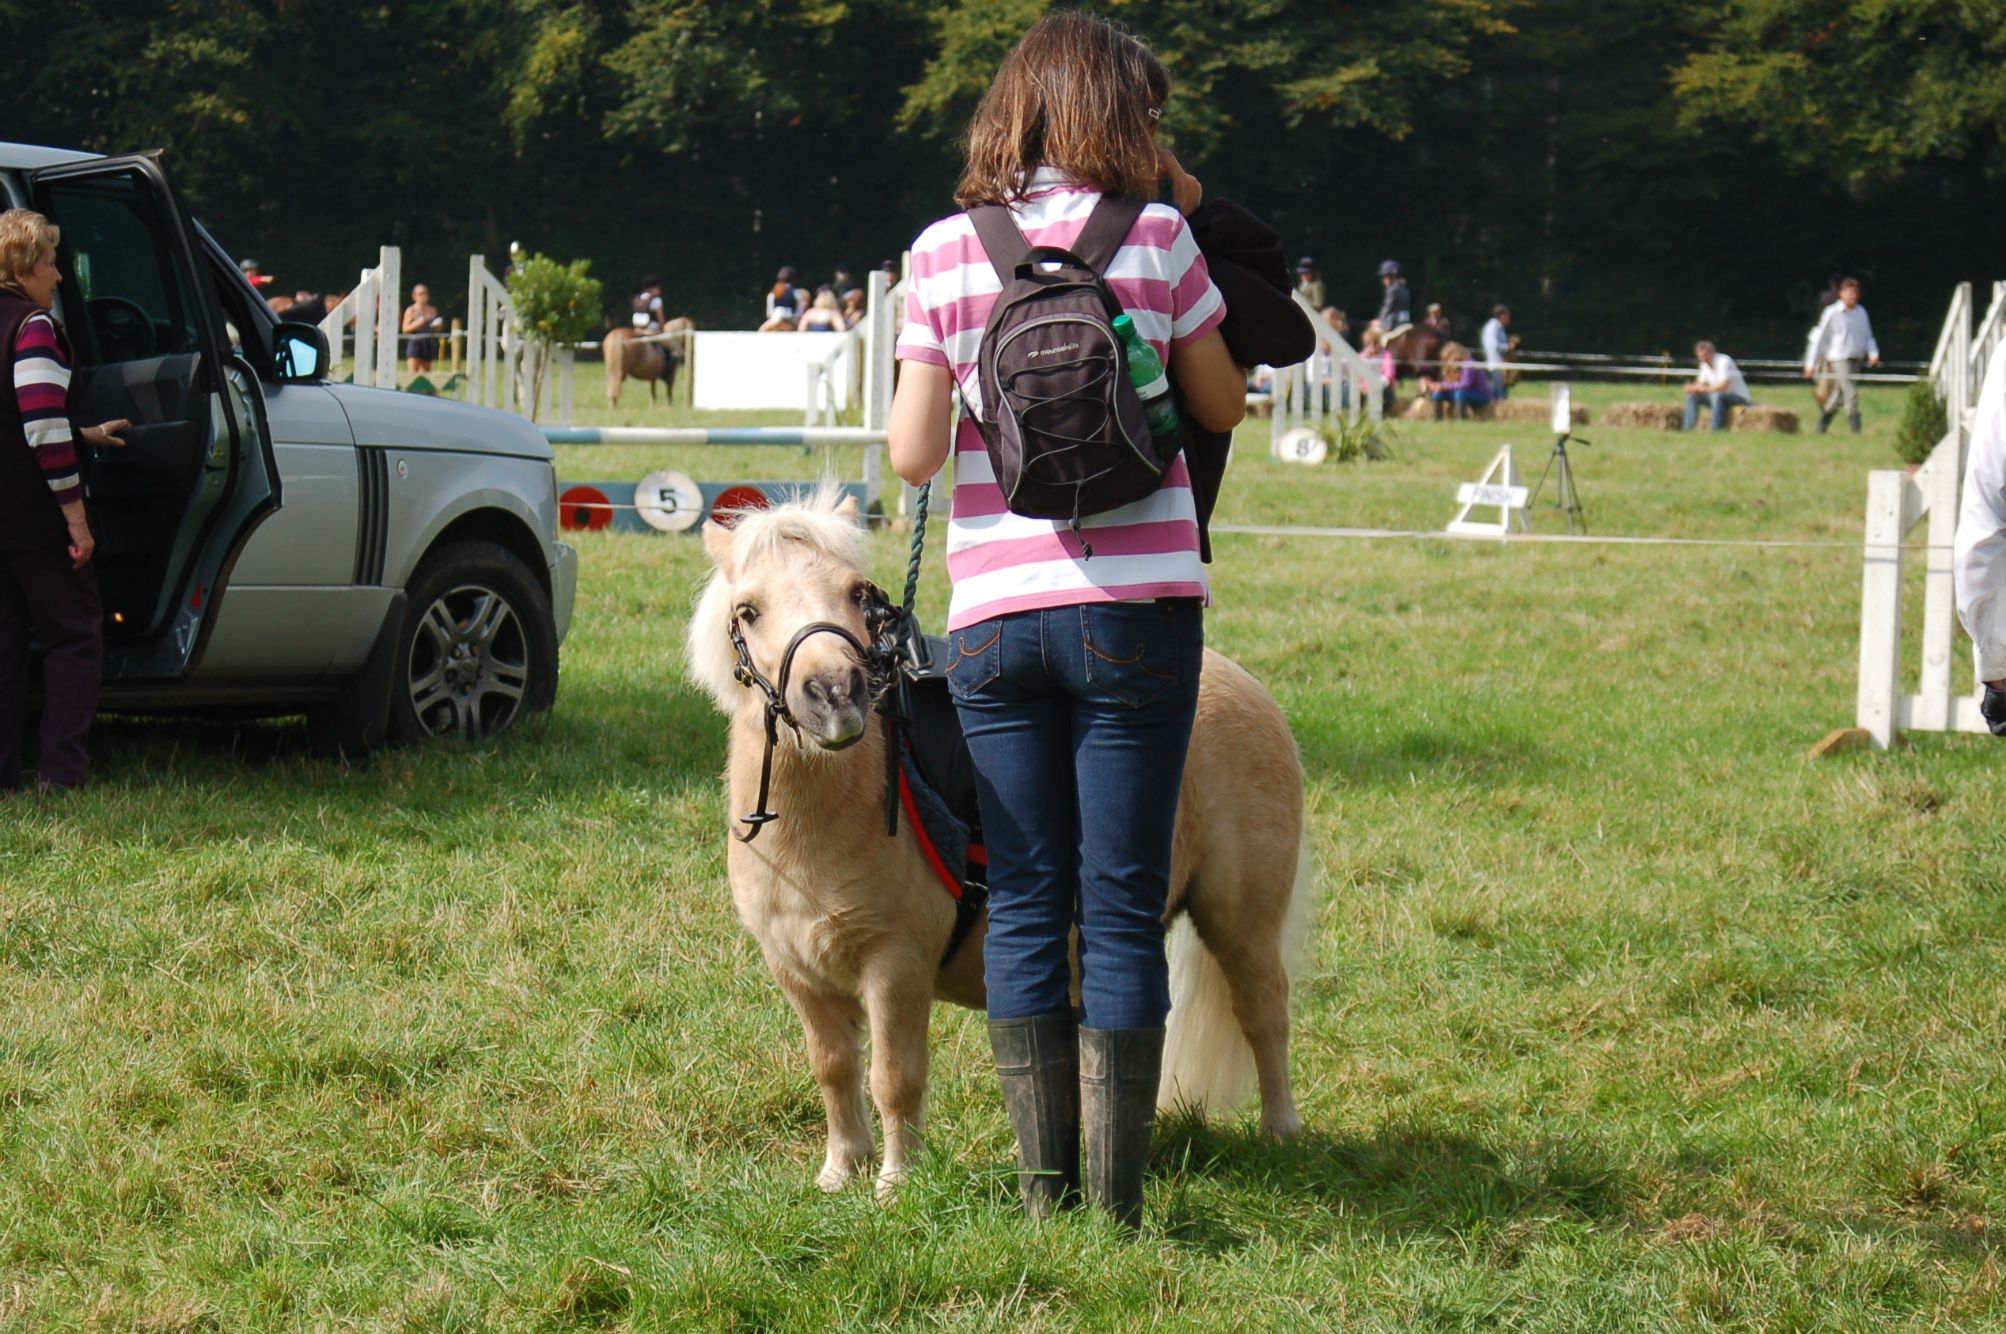 Smallest pony at the show?